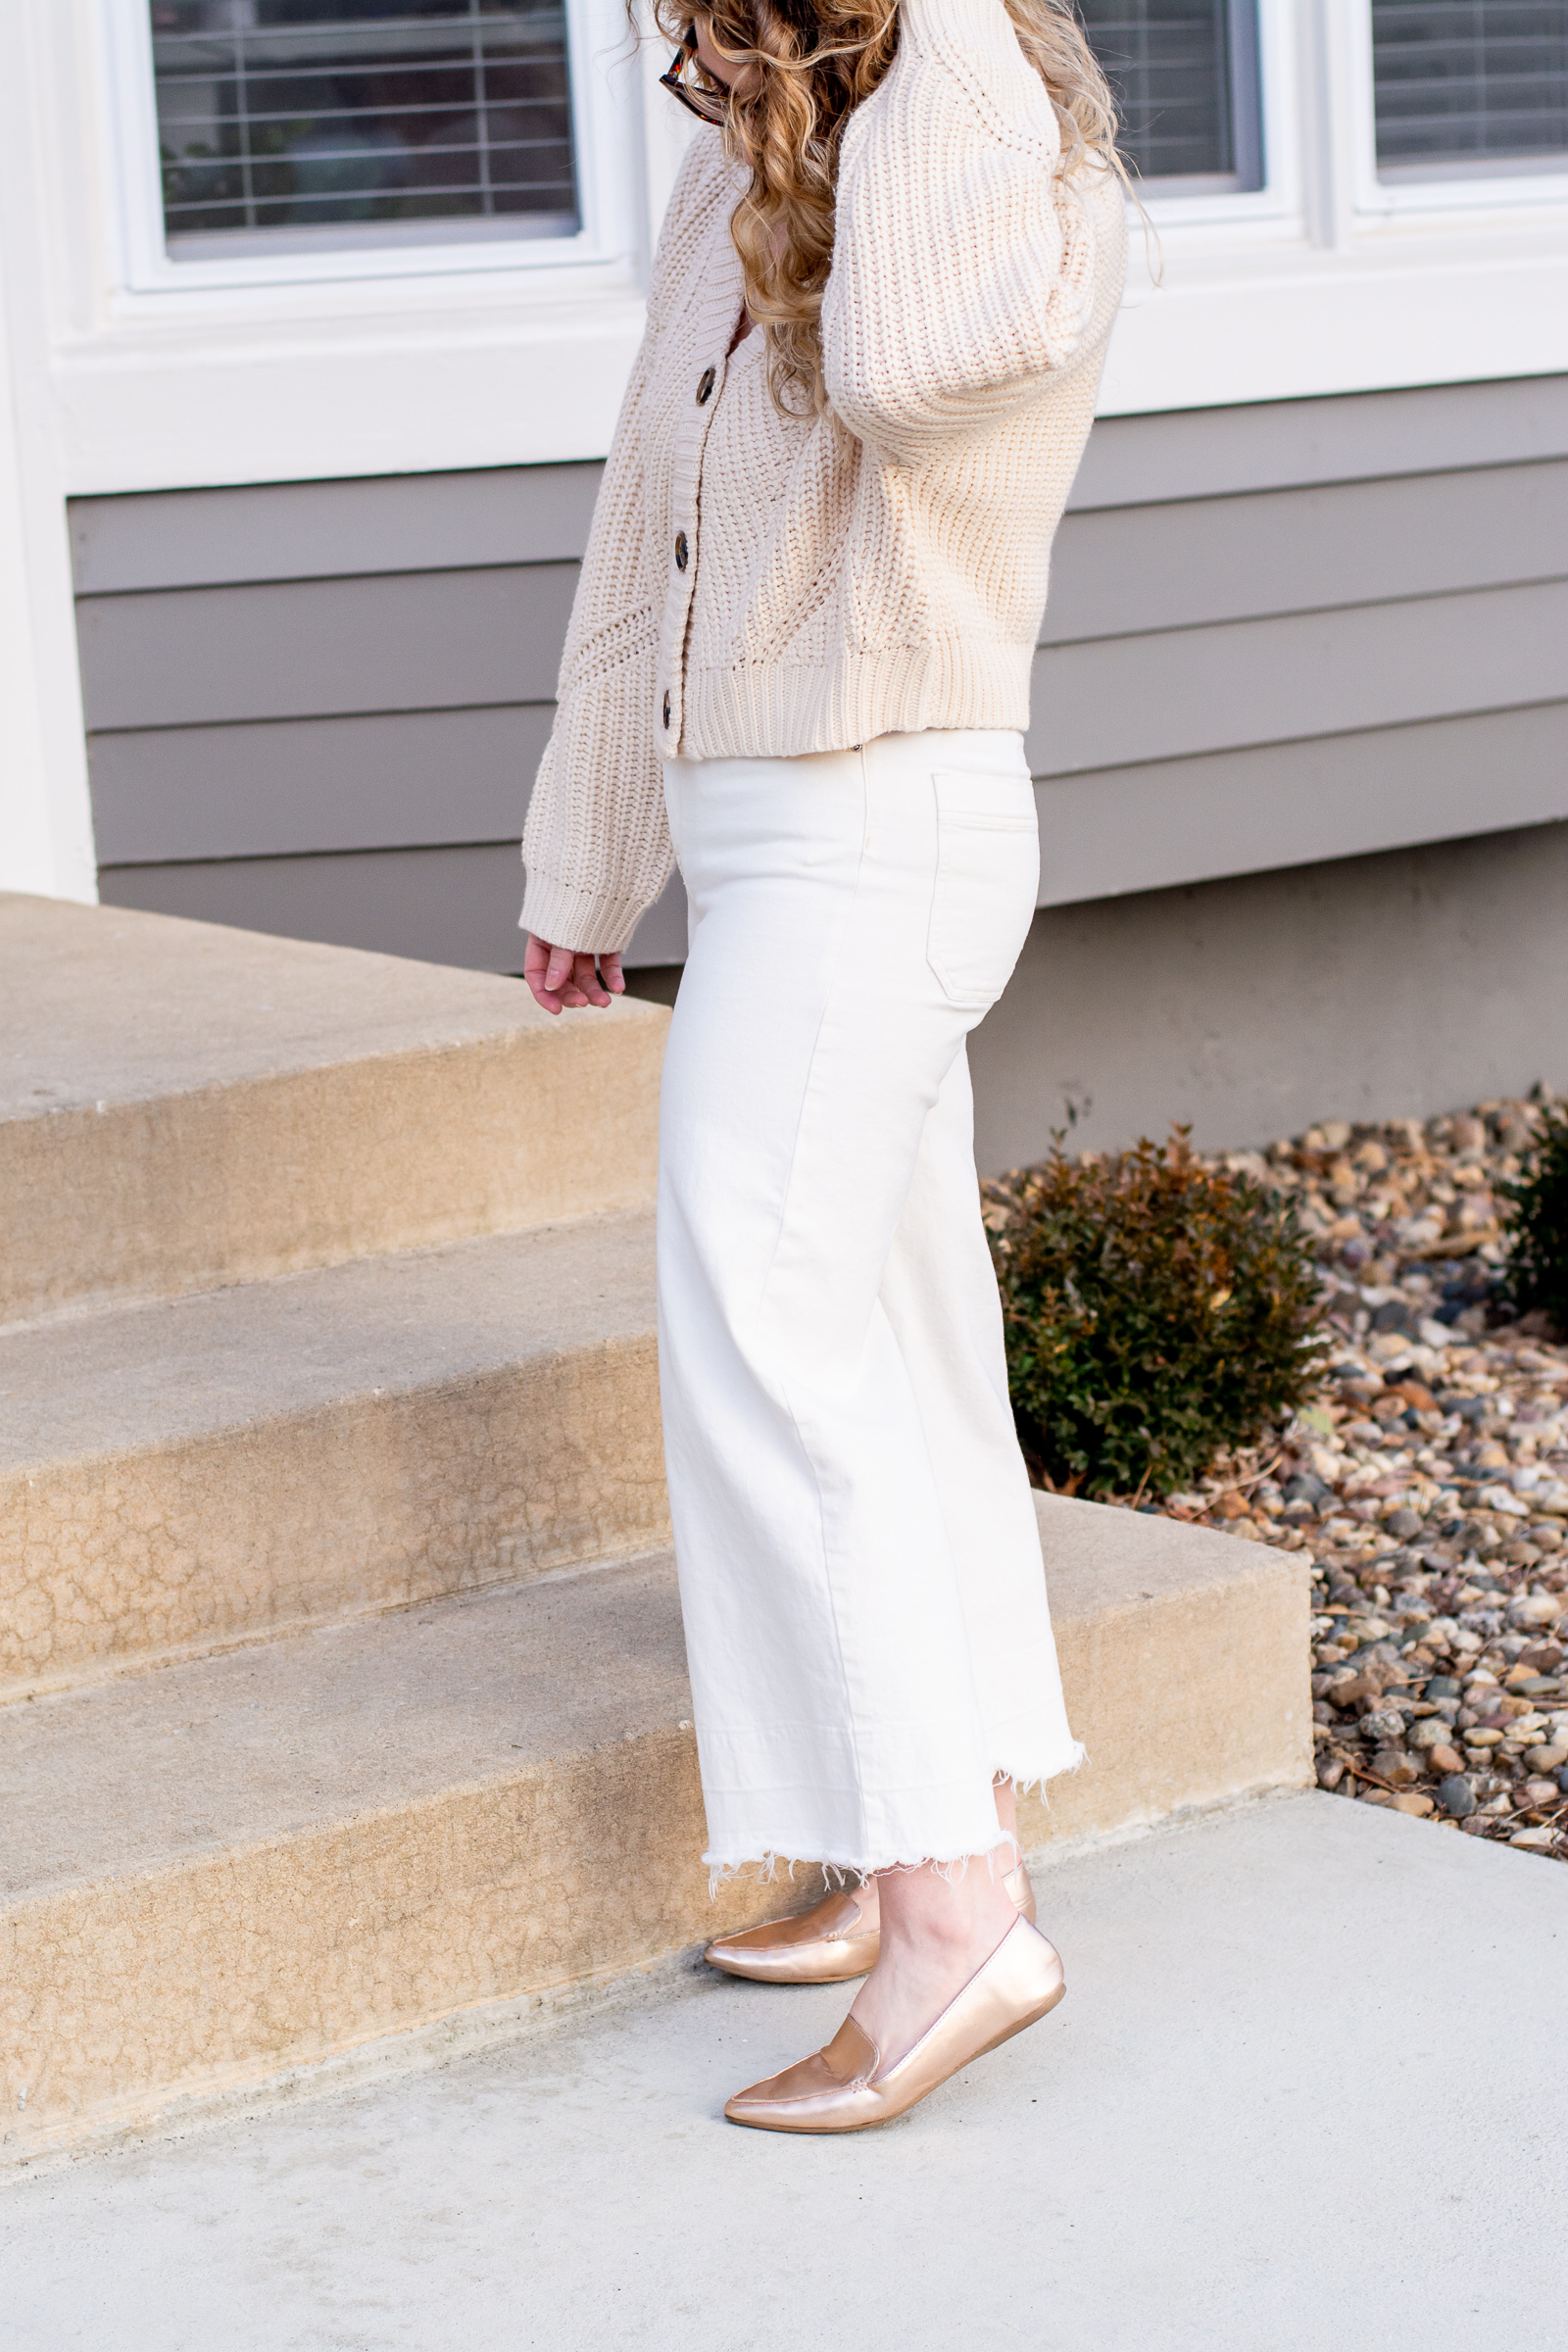 Springtime Neutrals that Keep You Cozy: Cardigan and Culottes. | LSR